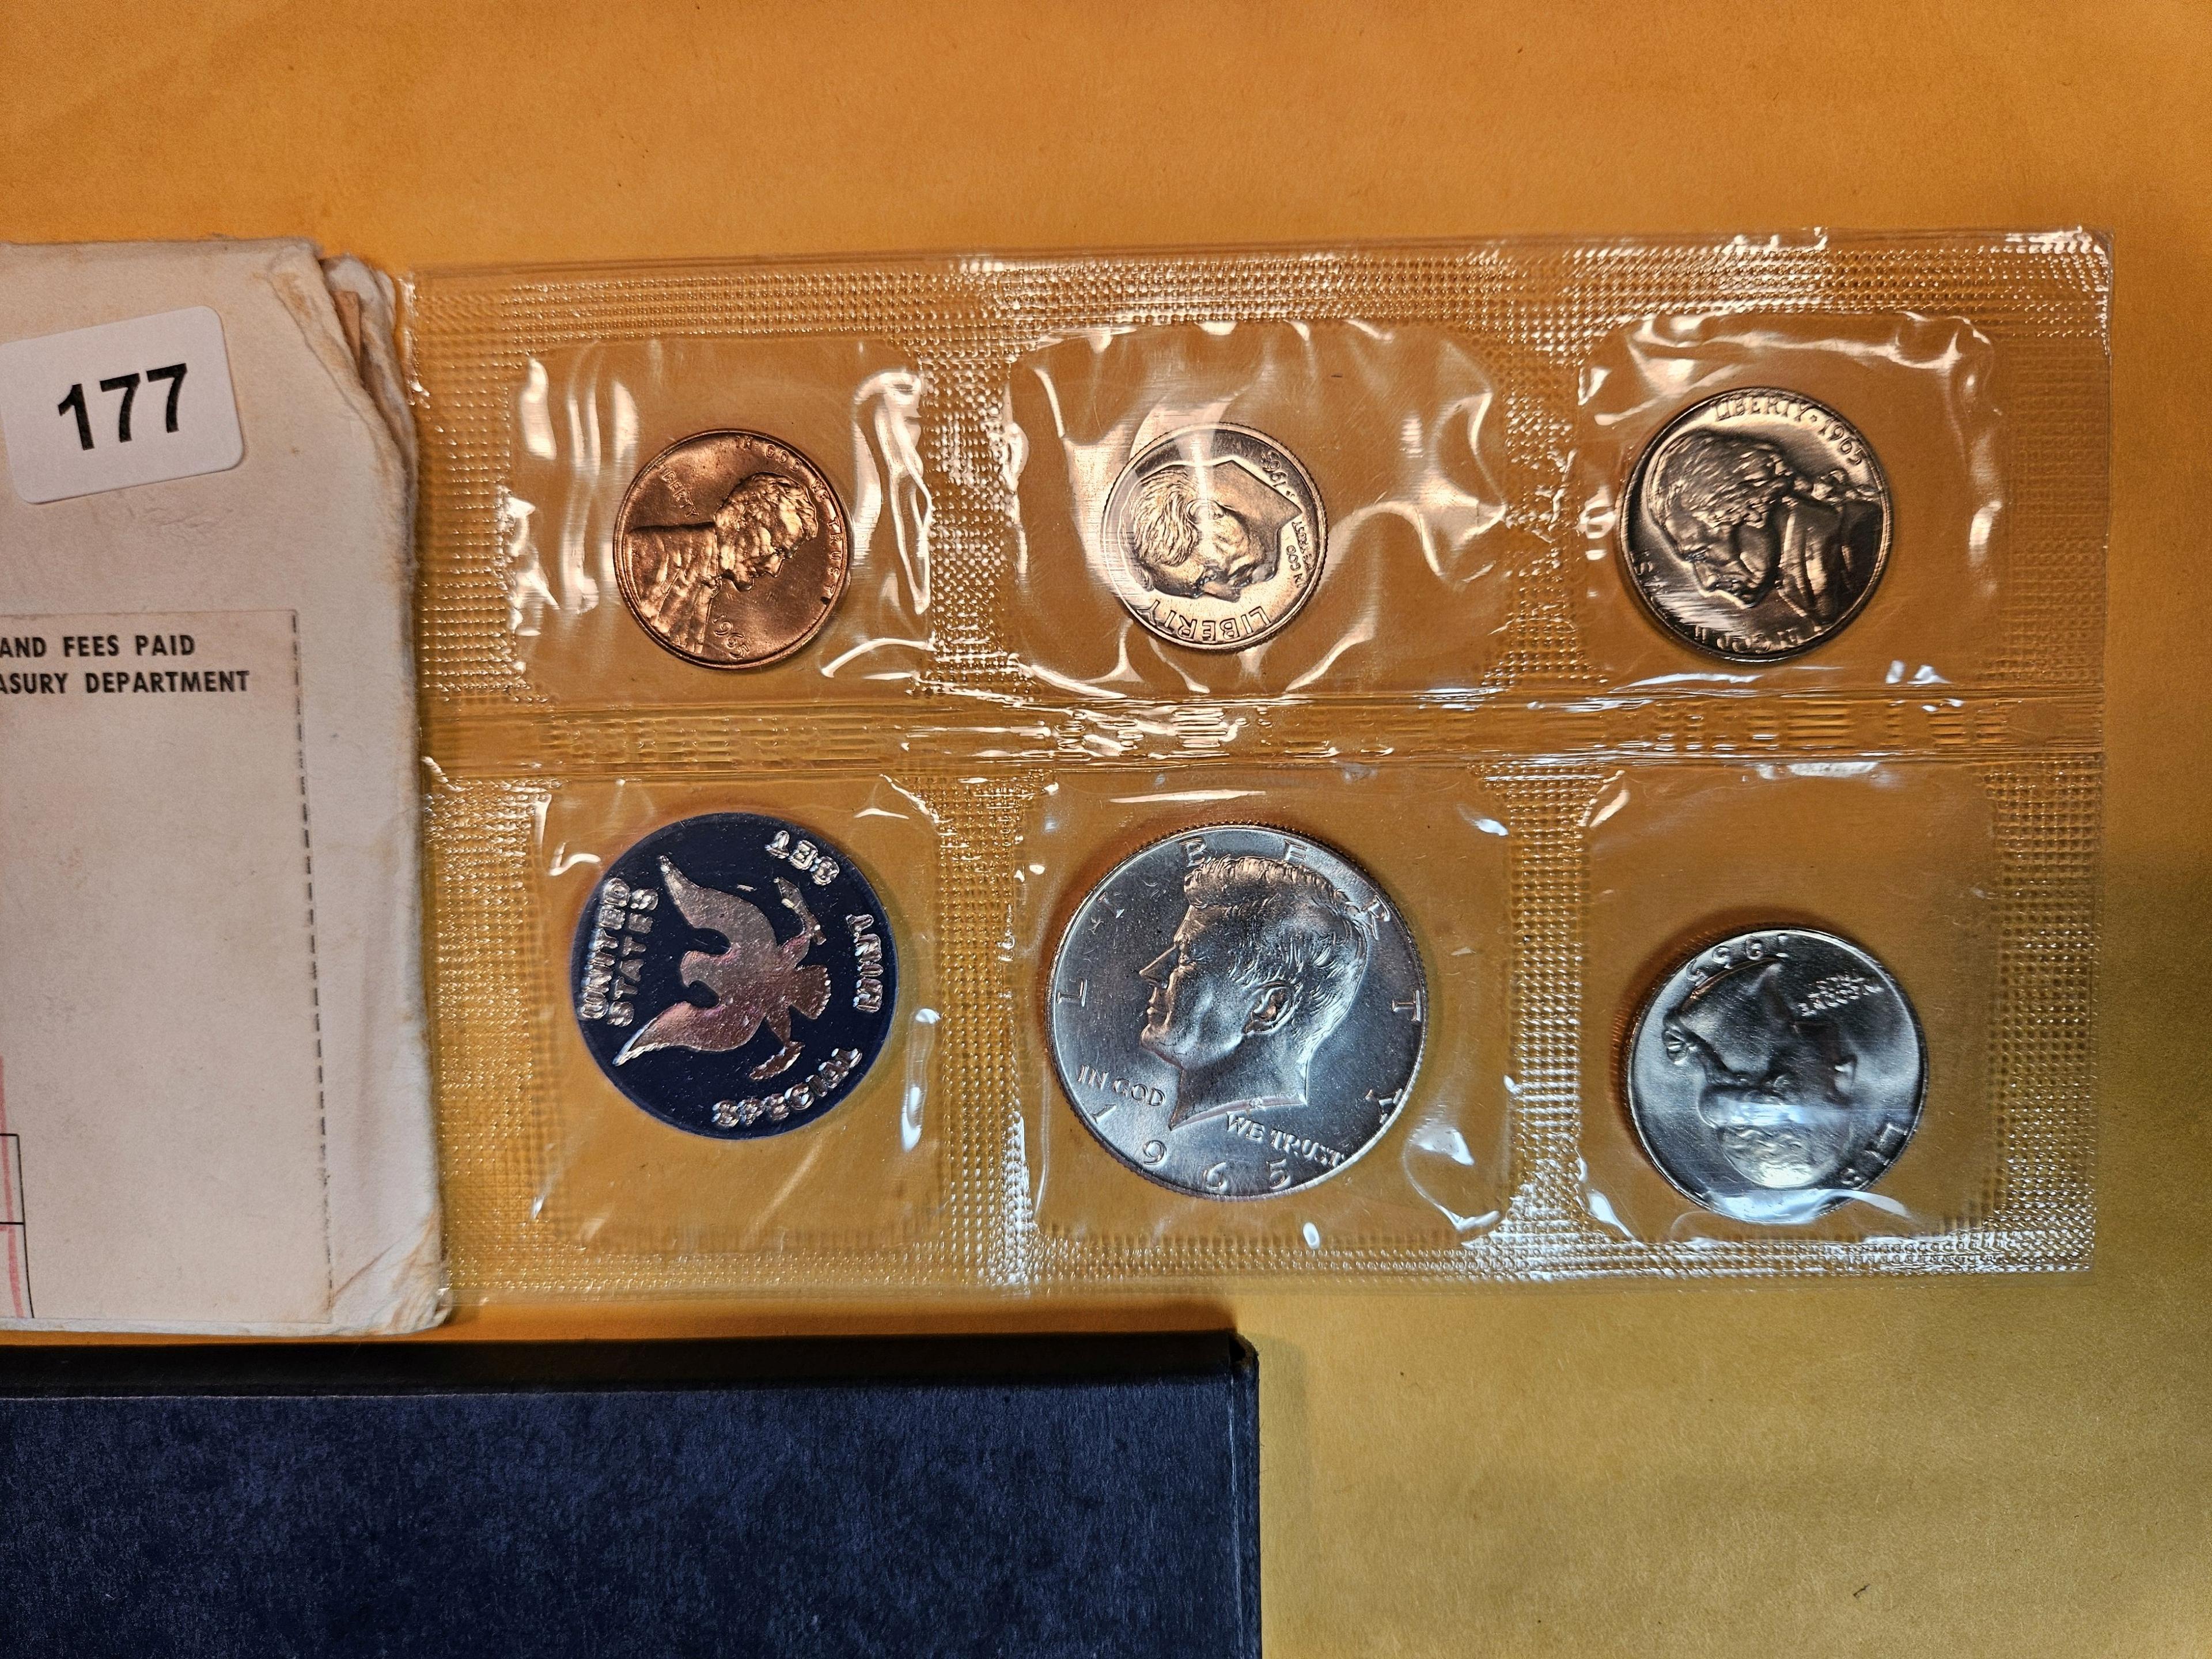 1965, 1966 and 1967 US Special Mint Sets